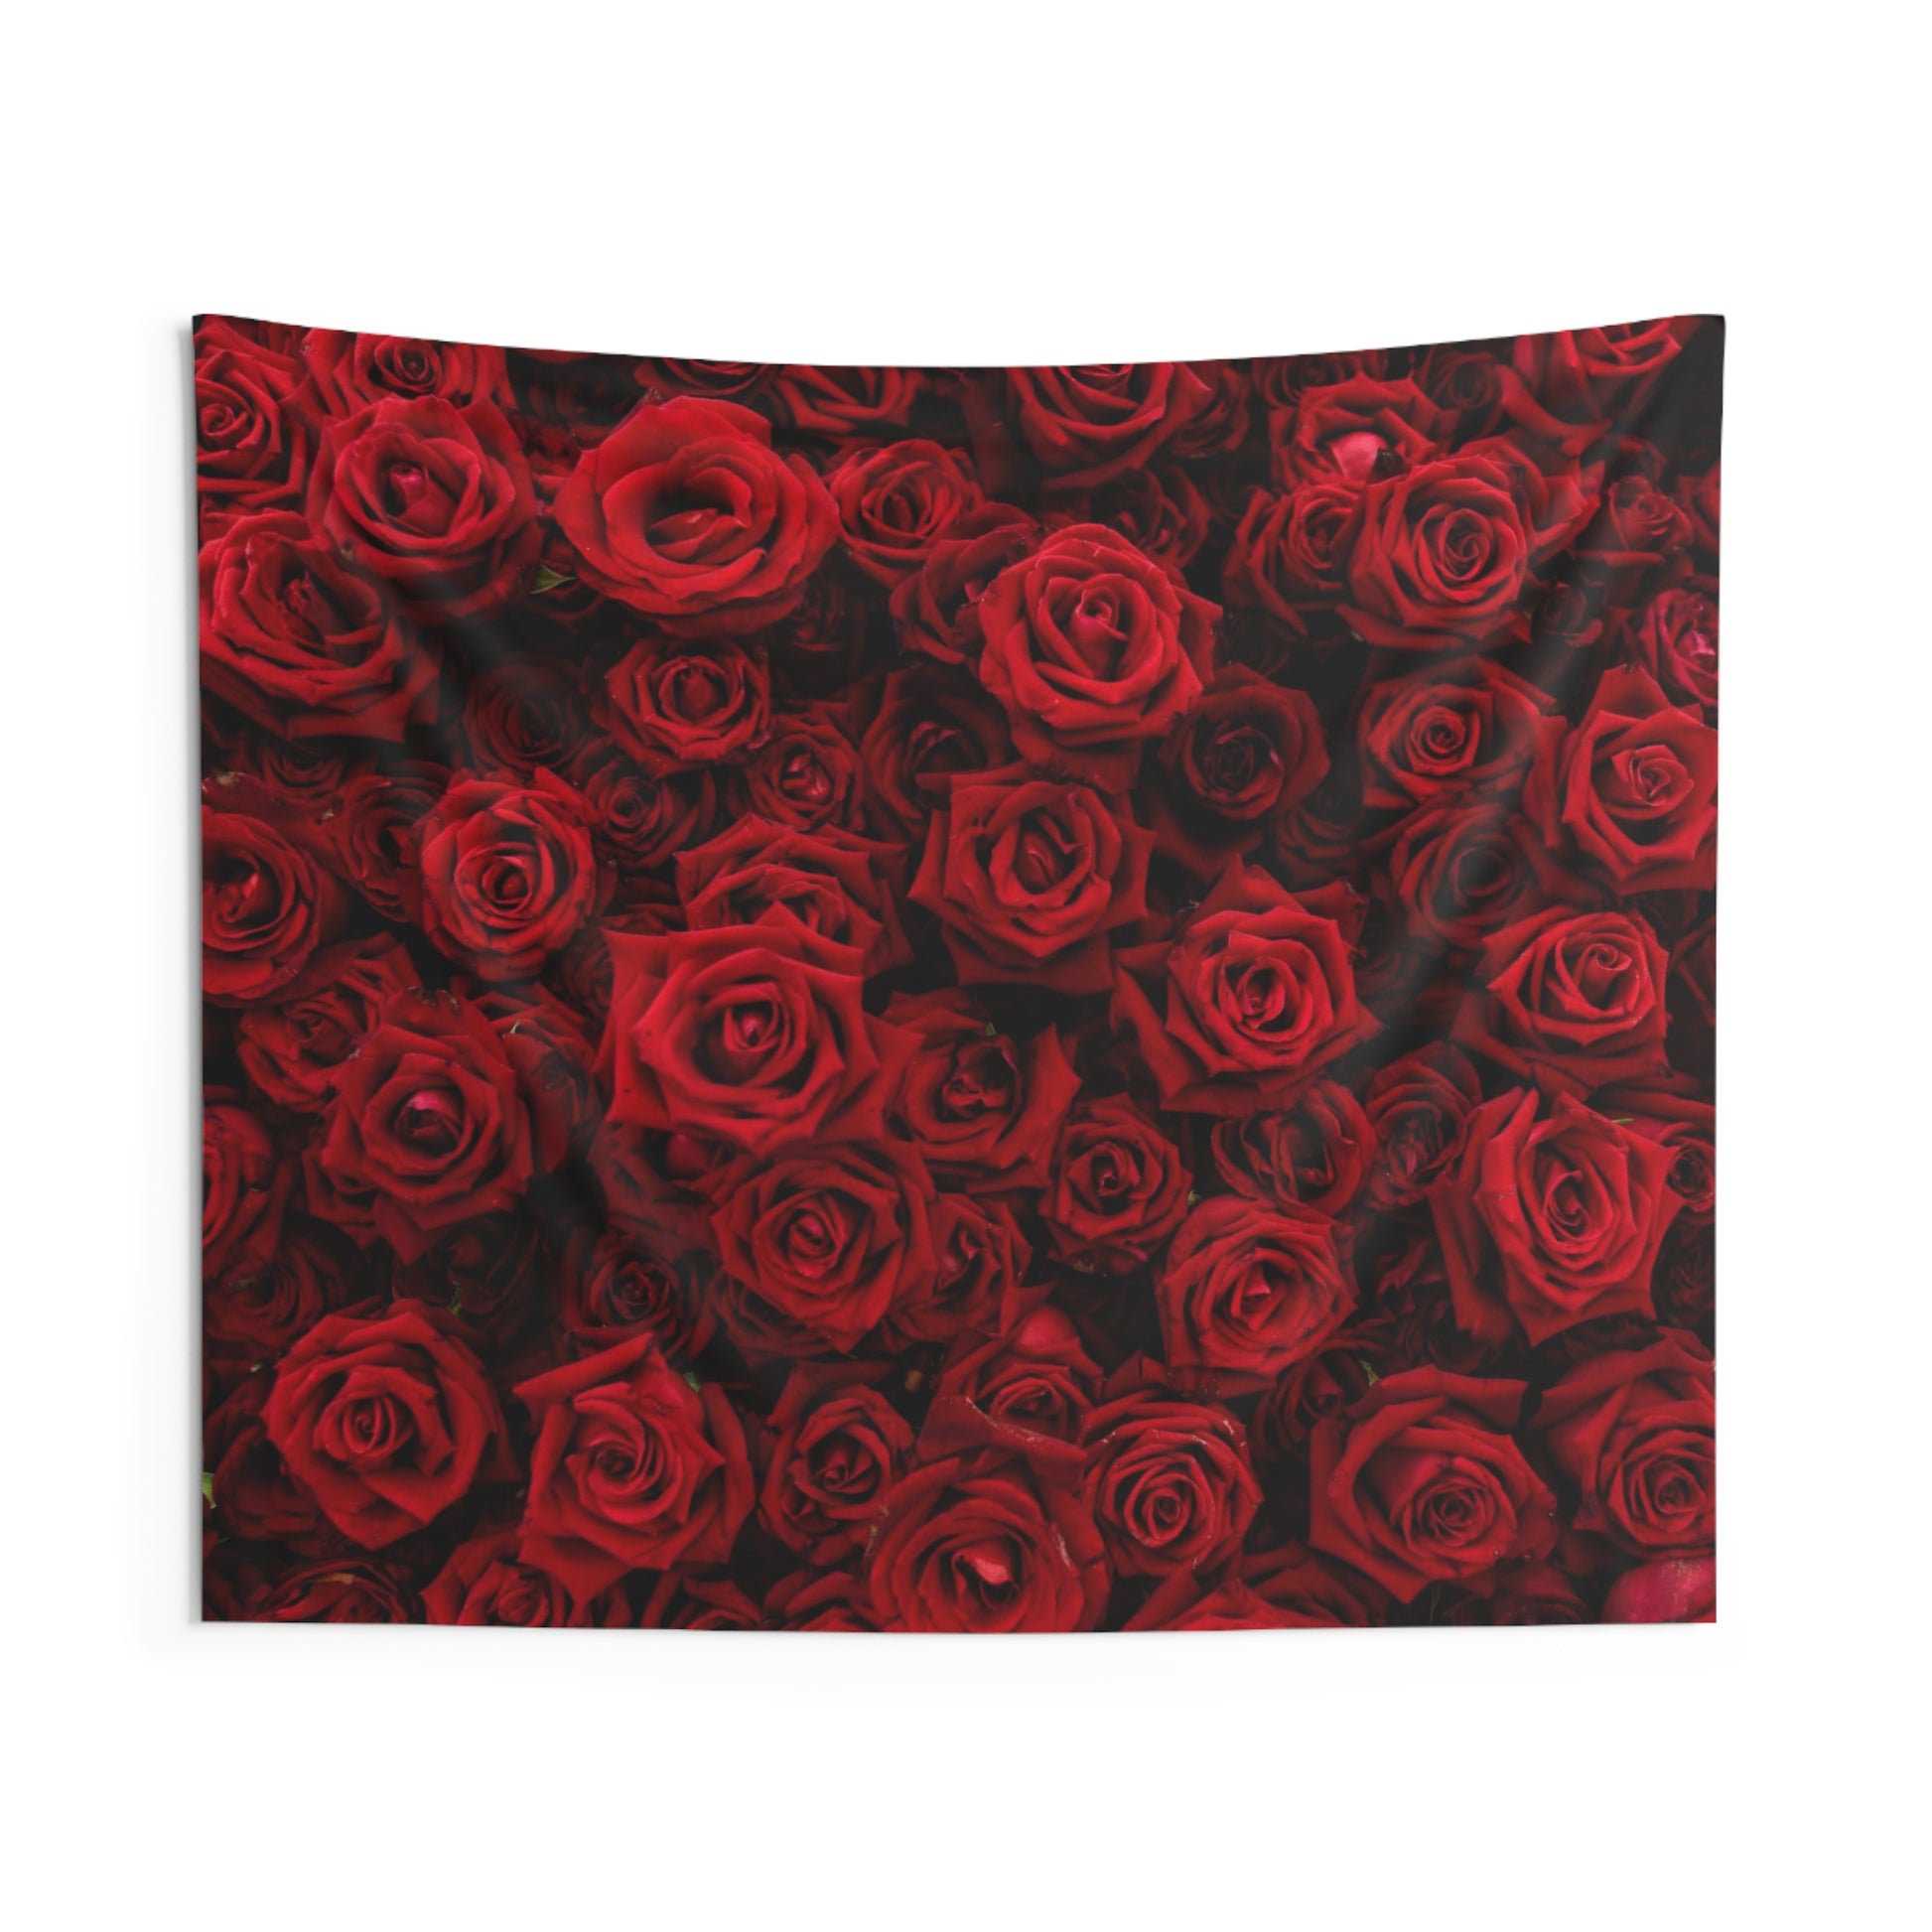 Red Roses Wall Tapestry, Floral Flowers Romantic Bridal Landscape Wall Hanging Large Small Decor Home Dorm Room Aesthetic Backdrop Starcove Fashion